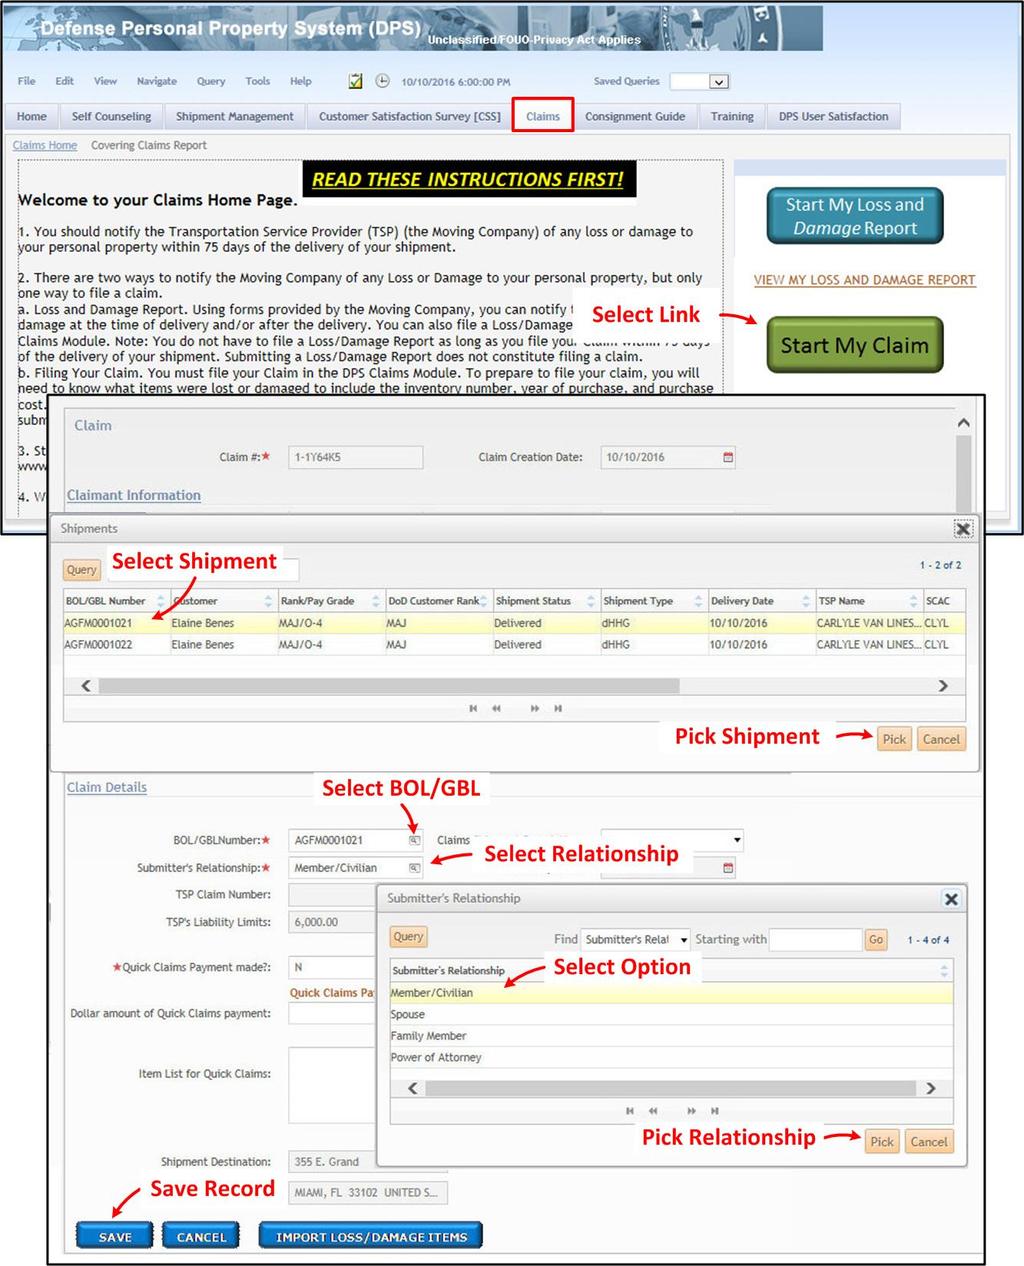 FILE A CLAIM SECTION 5.1 To file a new claim: 1. Log in to DPS and select the Claims tab. 2. Select the Start My Claim option. 3. On the Claim page, select the icon in the BOL/GBL Number field.